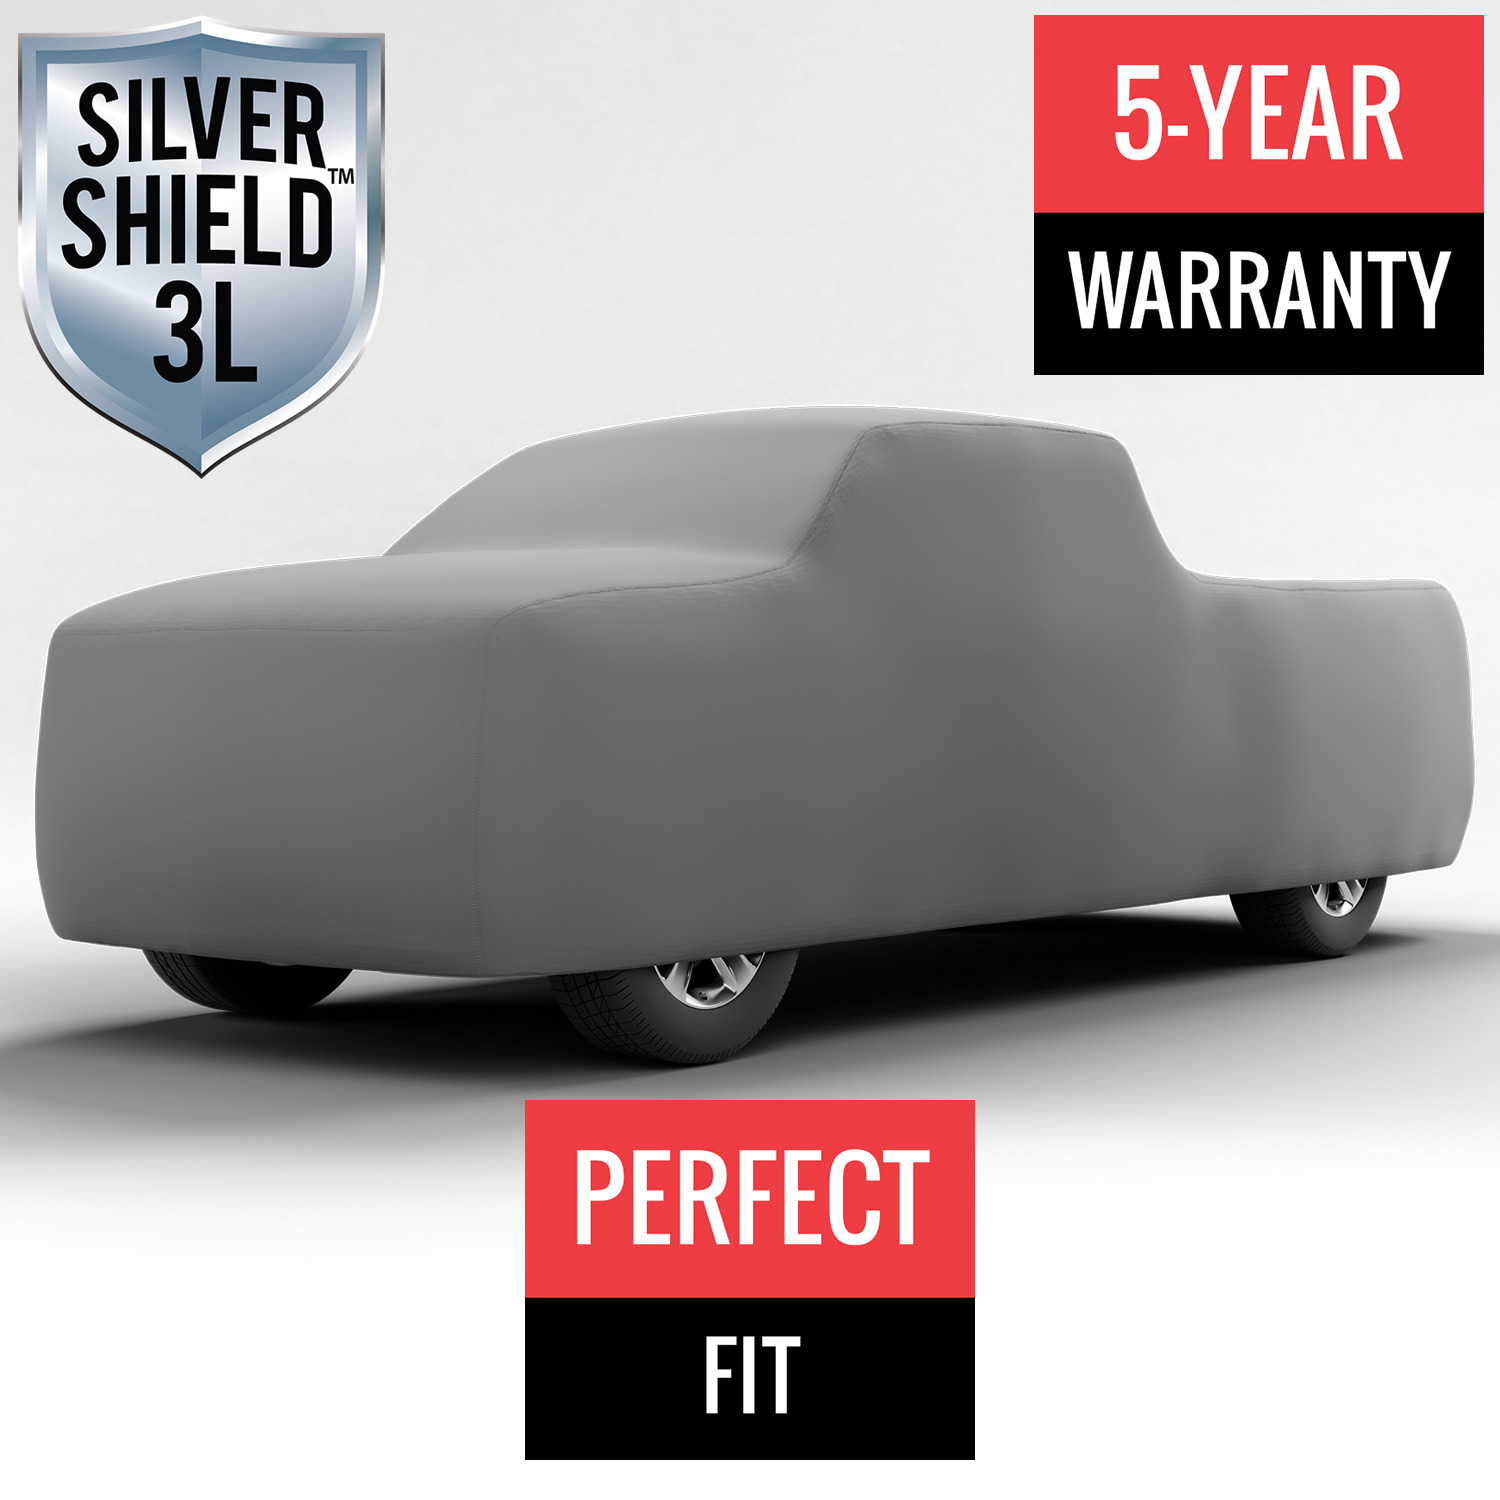 Silver Shield 3L - Car Cover for Dodge Ram 3500 2004 Regular Cab Pickup 8.0 Feet Bed